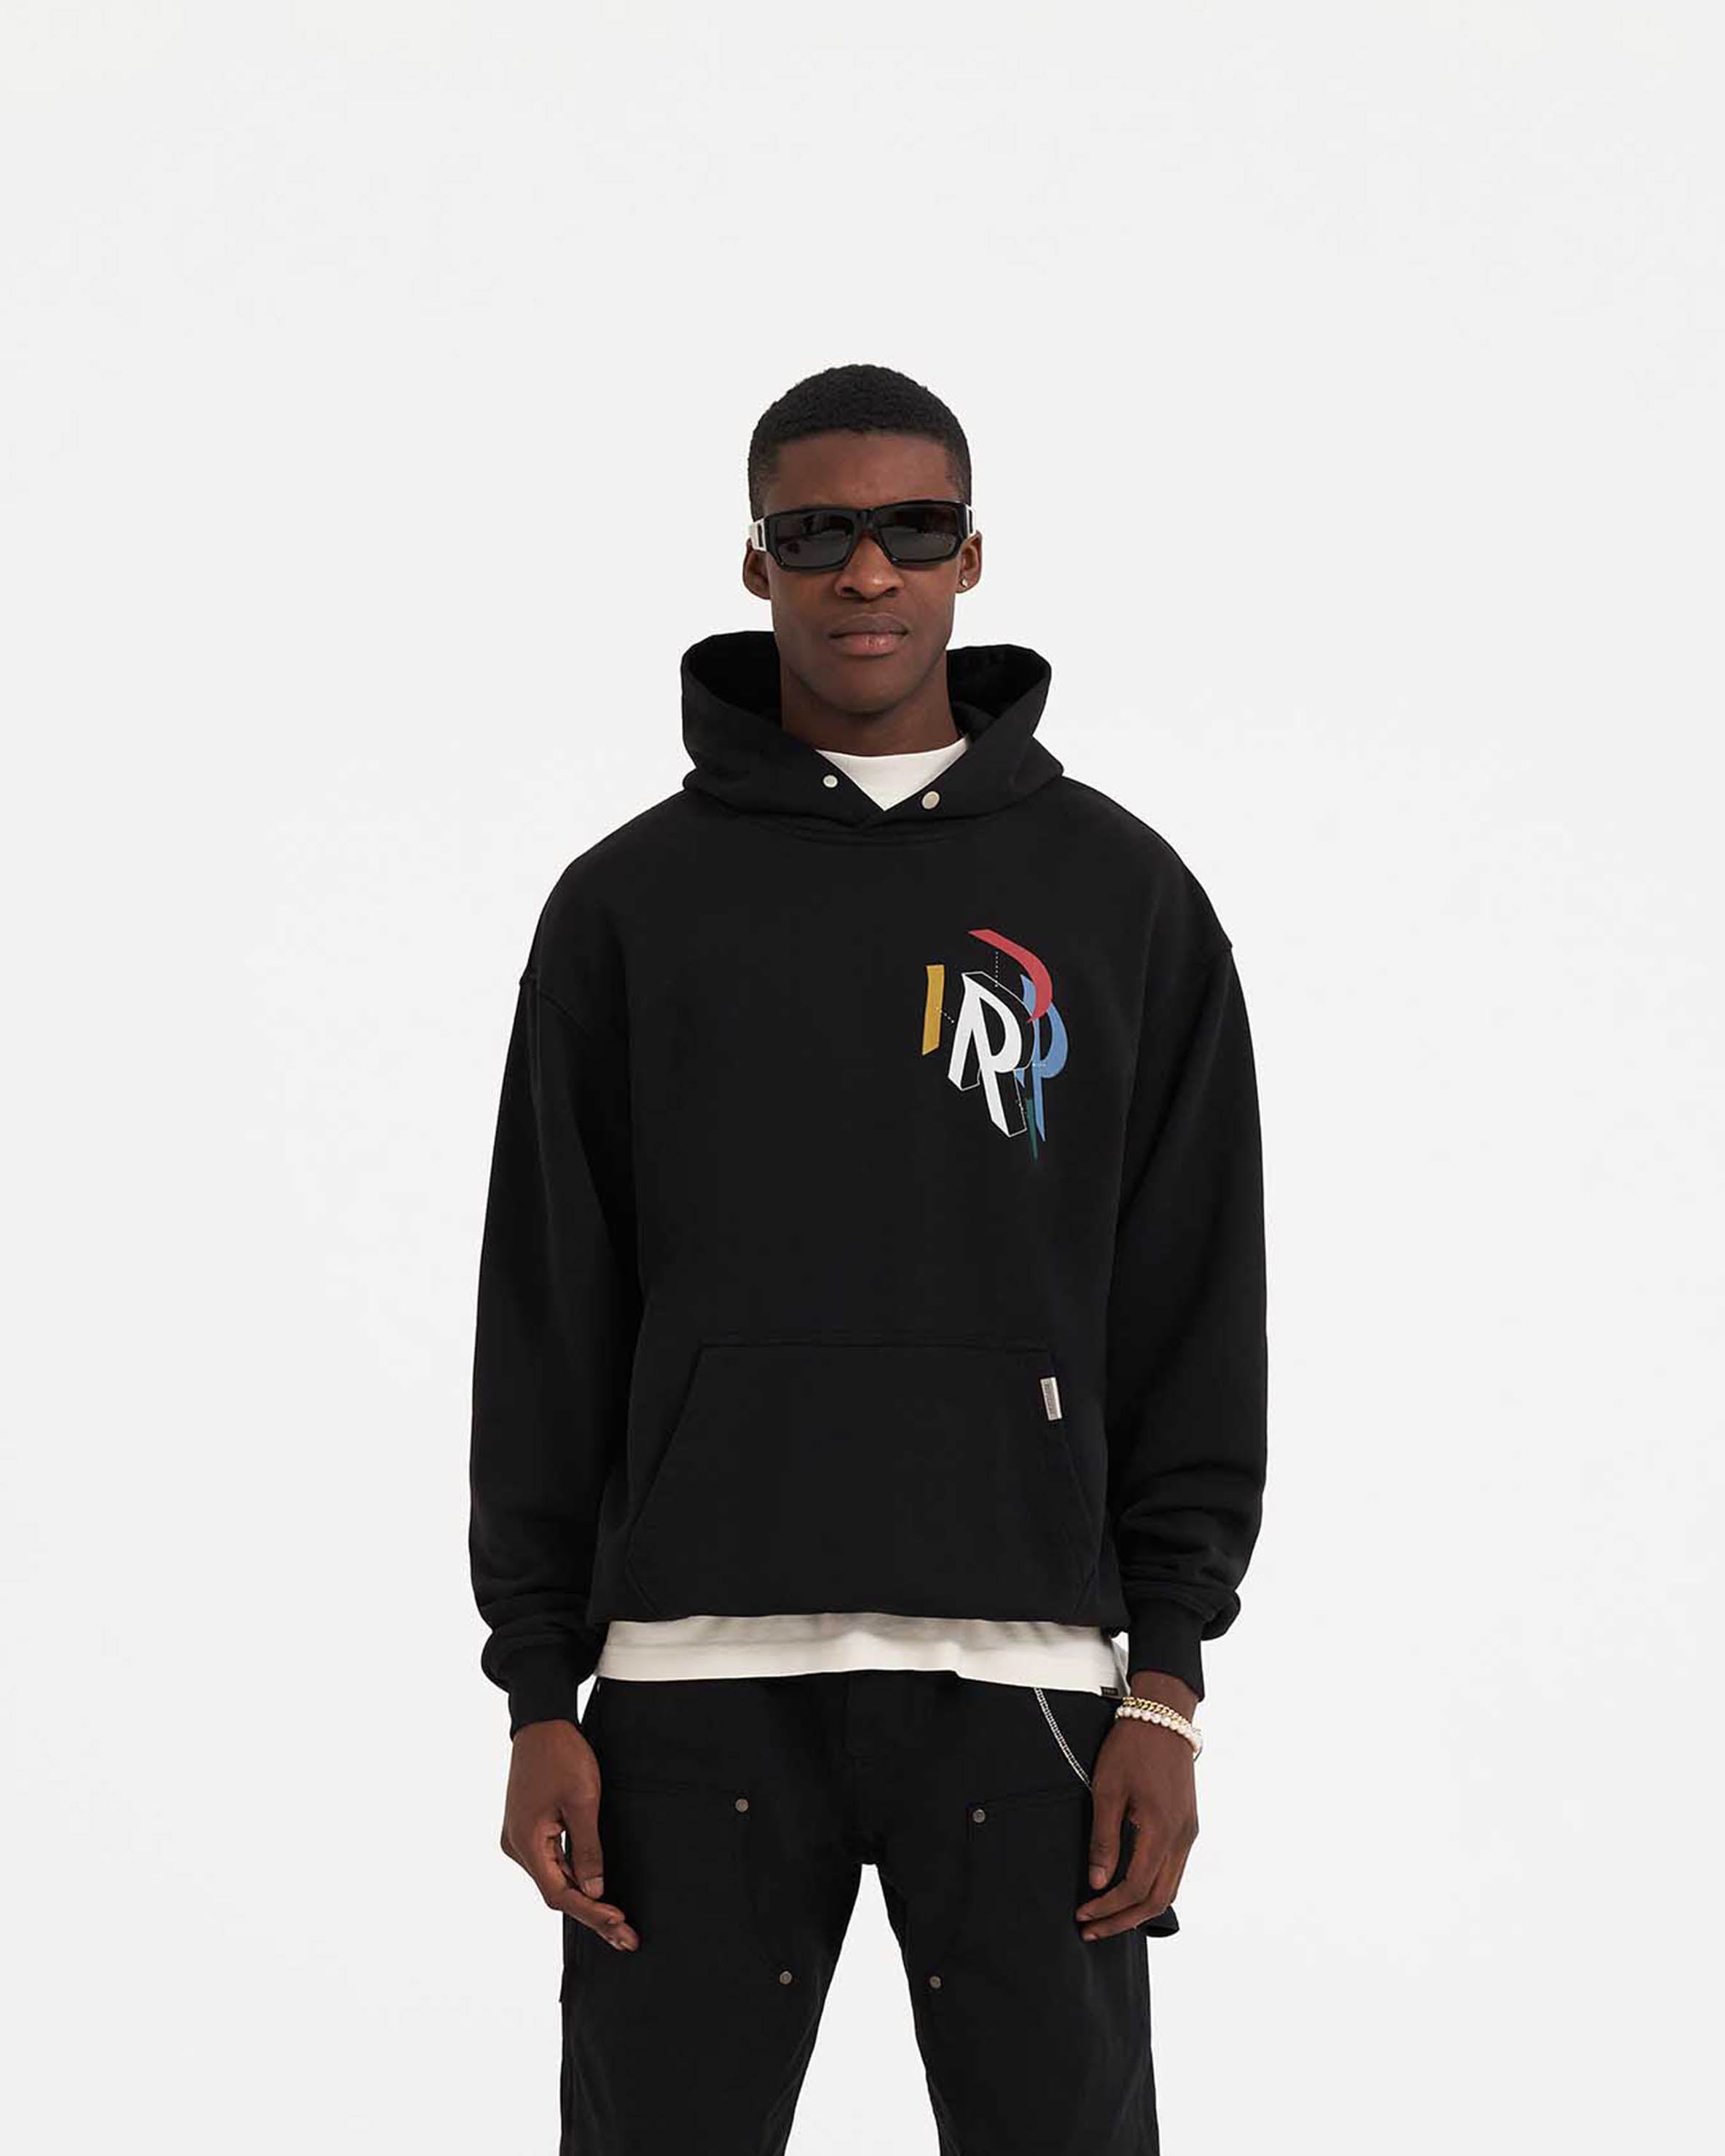 Initial Assembly Hoodie | Black | REPRESENT CLO